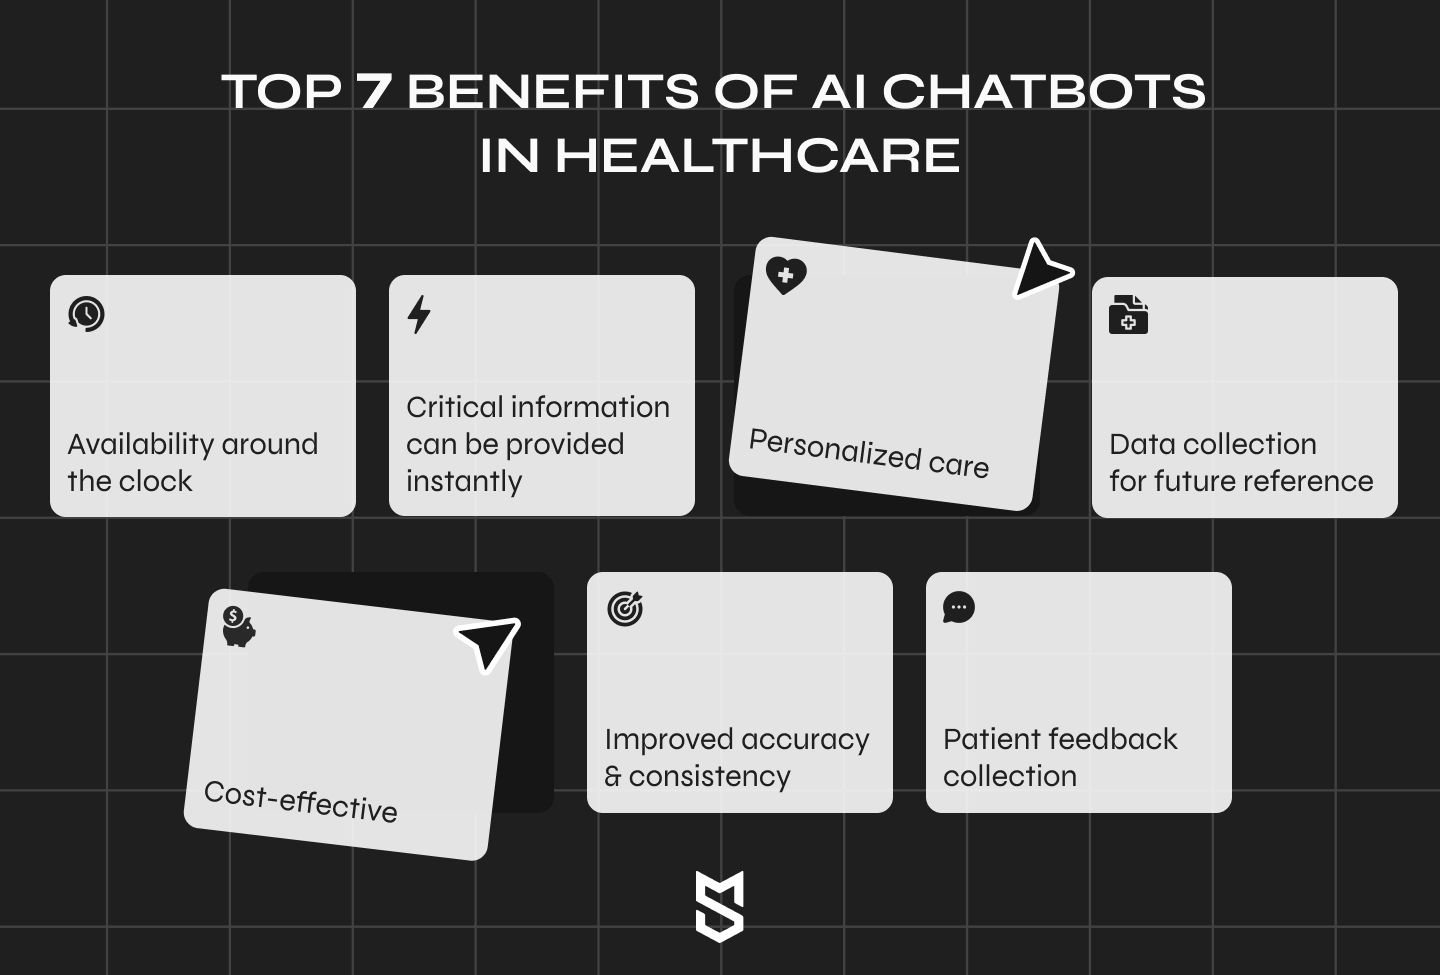 Top 7 benefits of AI chatbots in healthcare